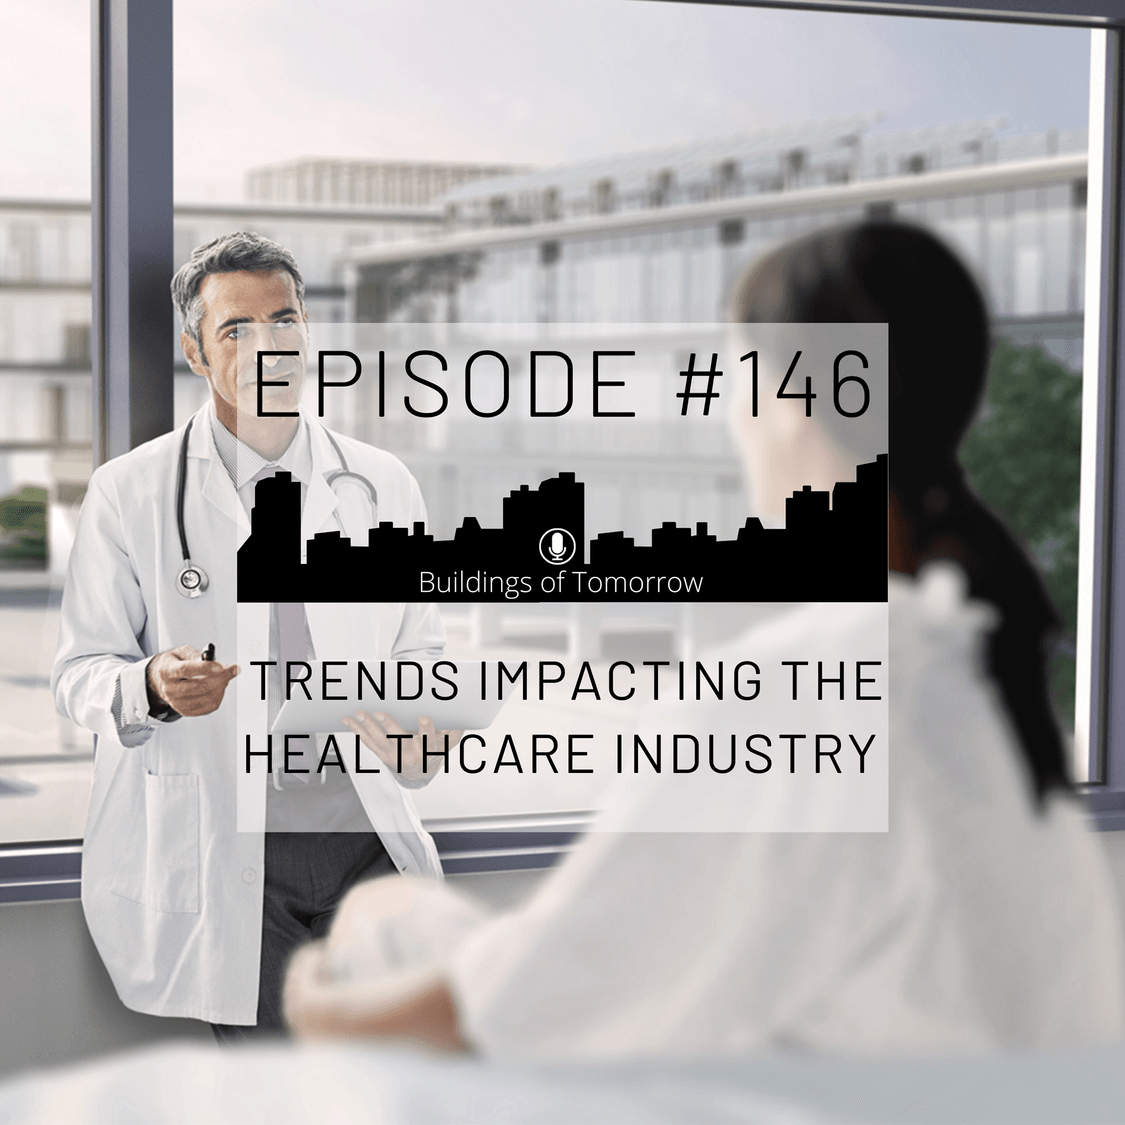 keyvisual episode #146 Trends impacting the Healthcare Industry